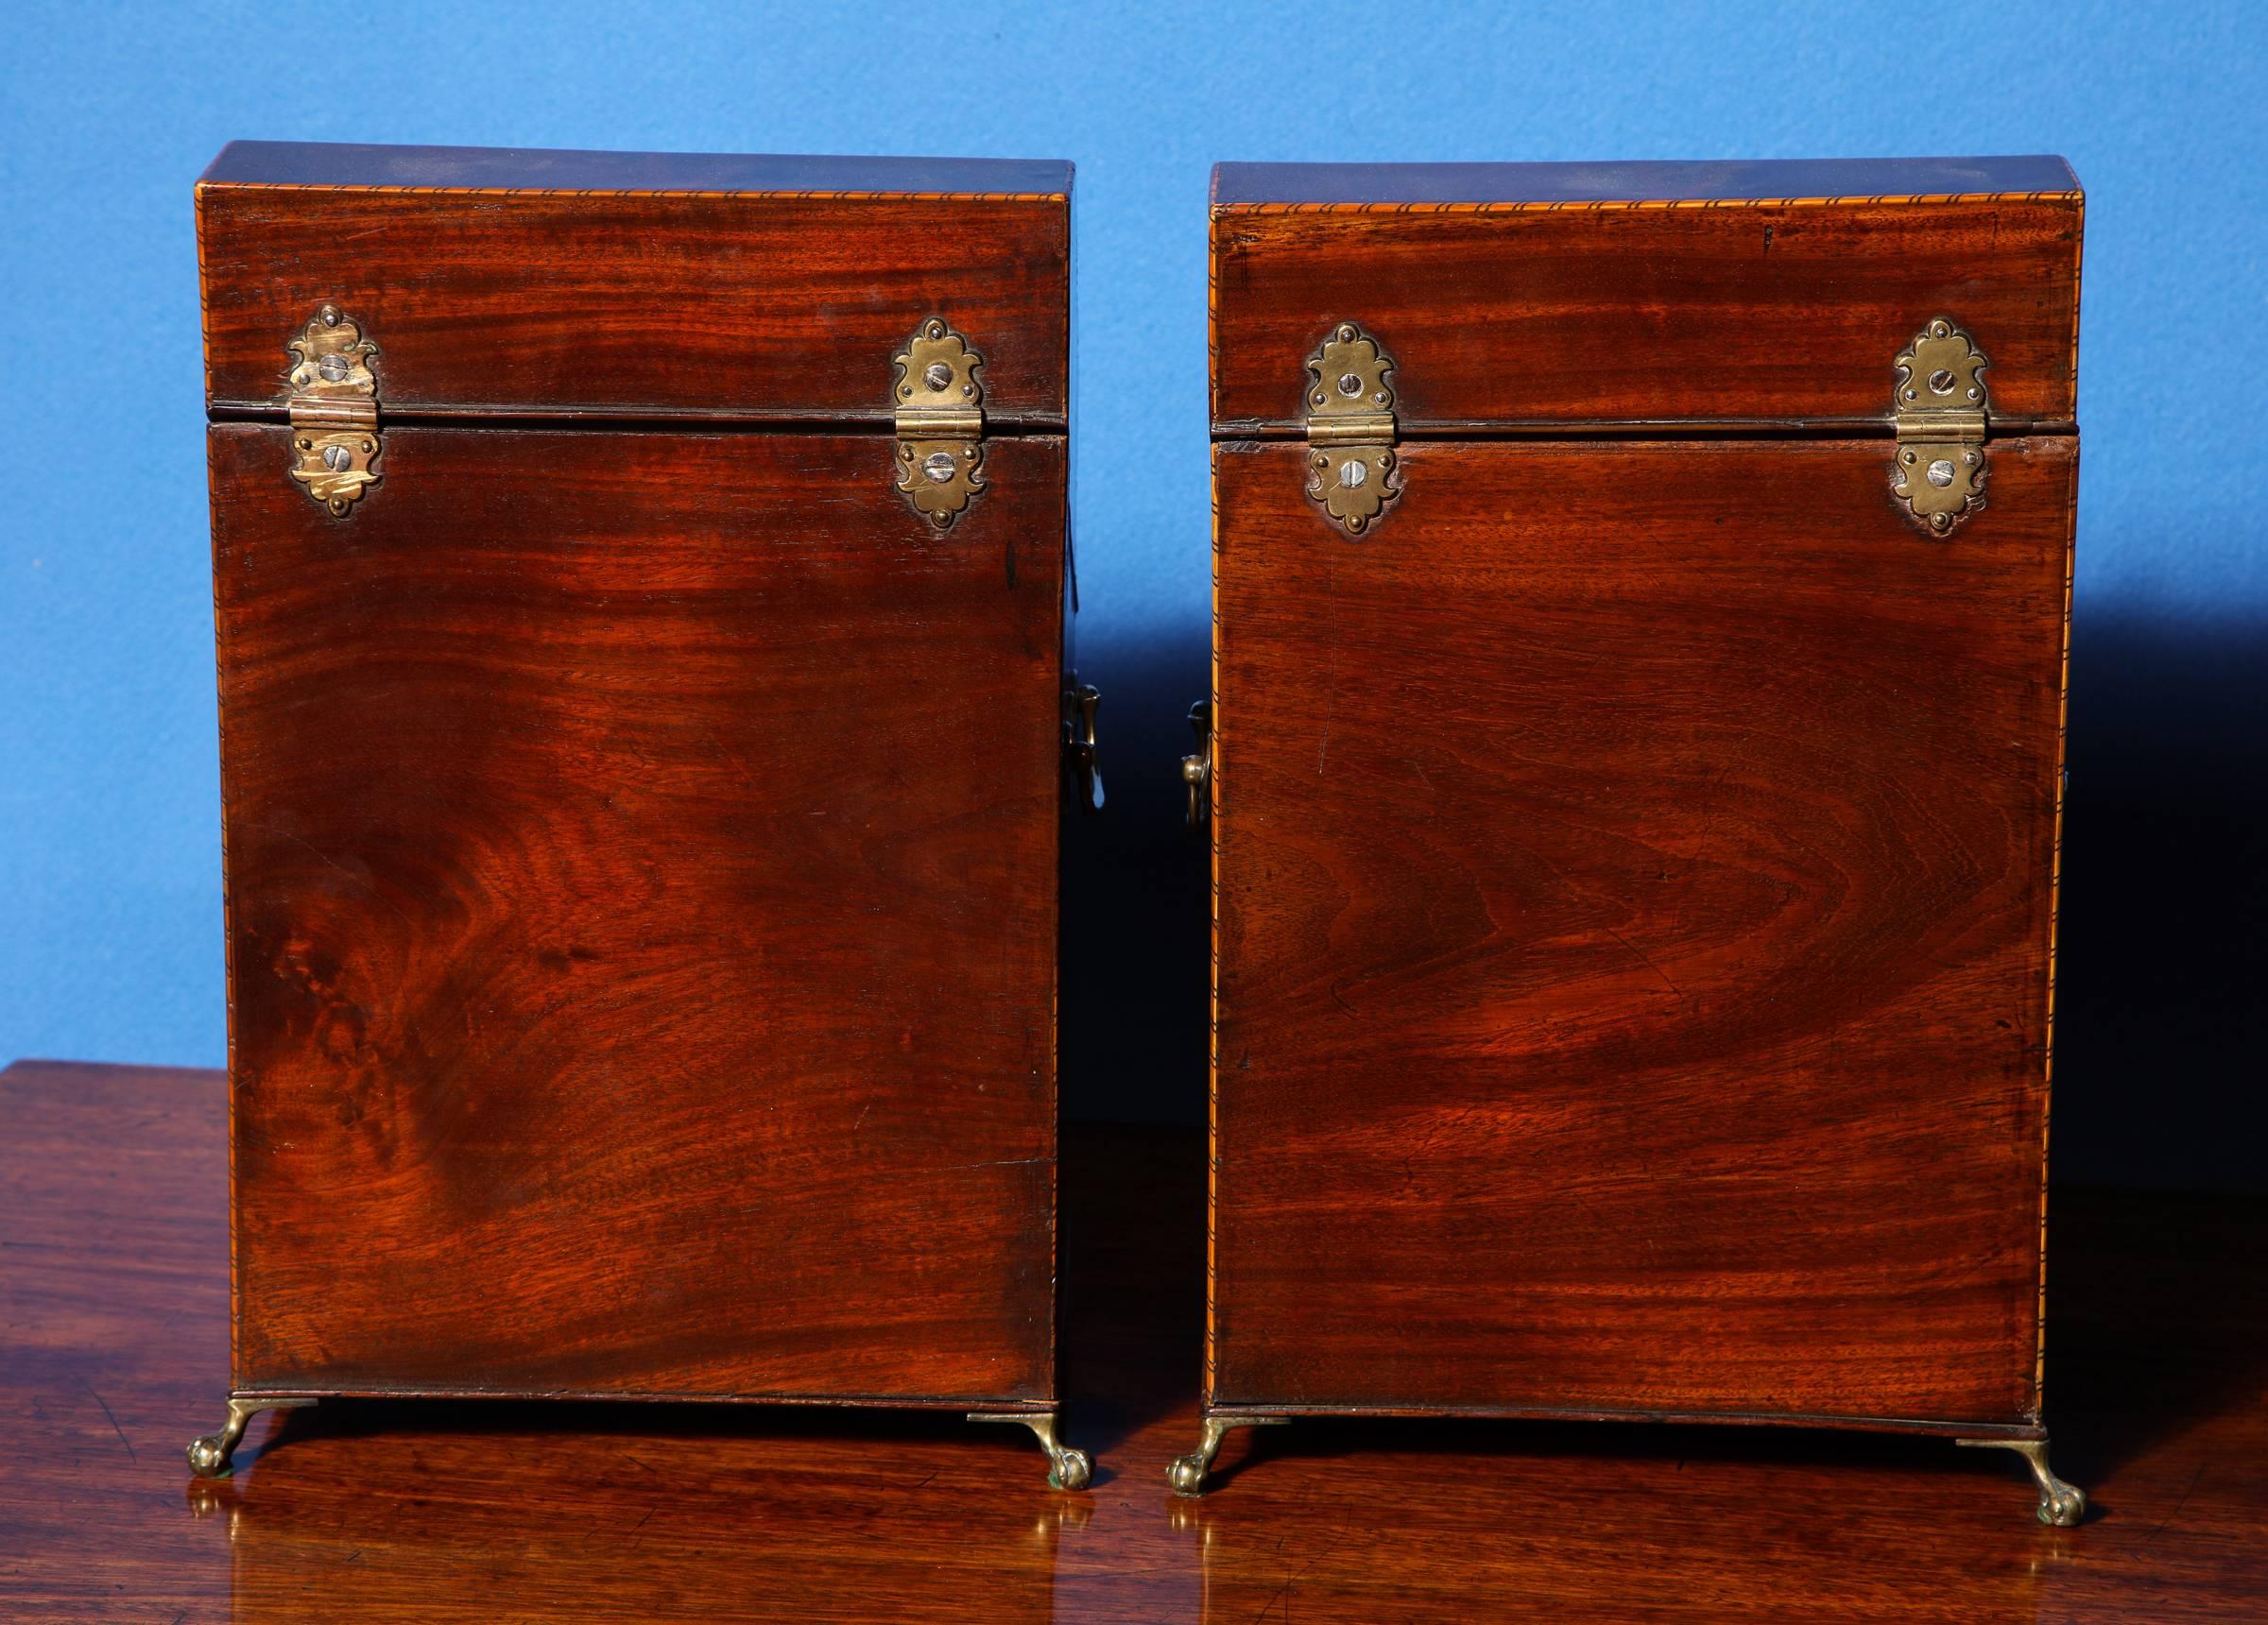 Pair of George III Period Serpentine Mahogany Knife Boxes English, circa 1770 For Sale 2